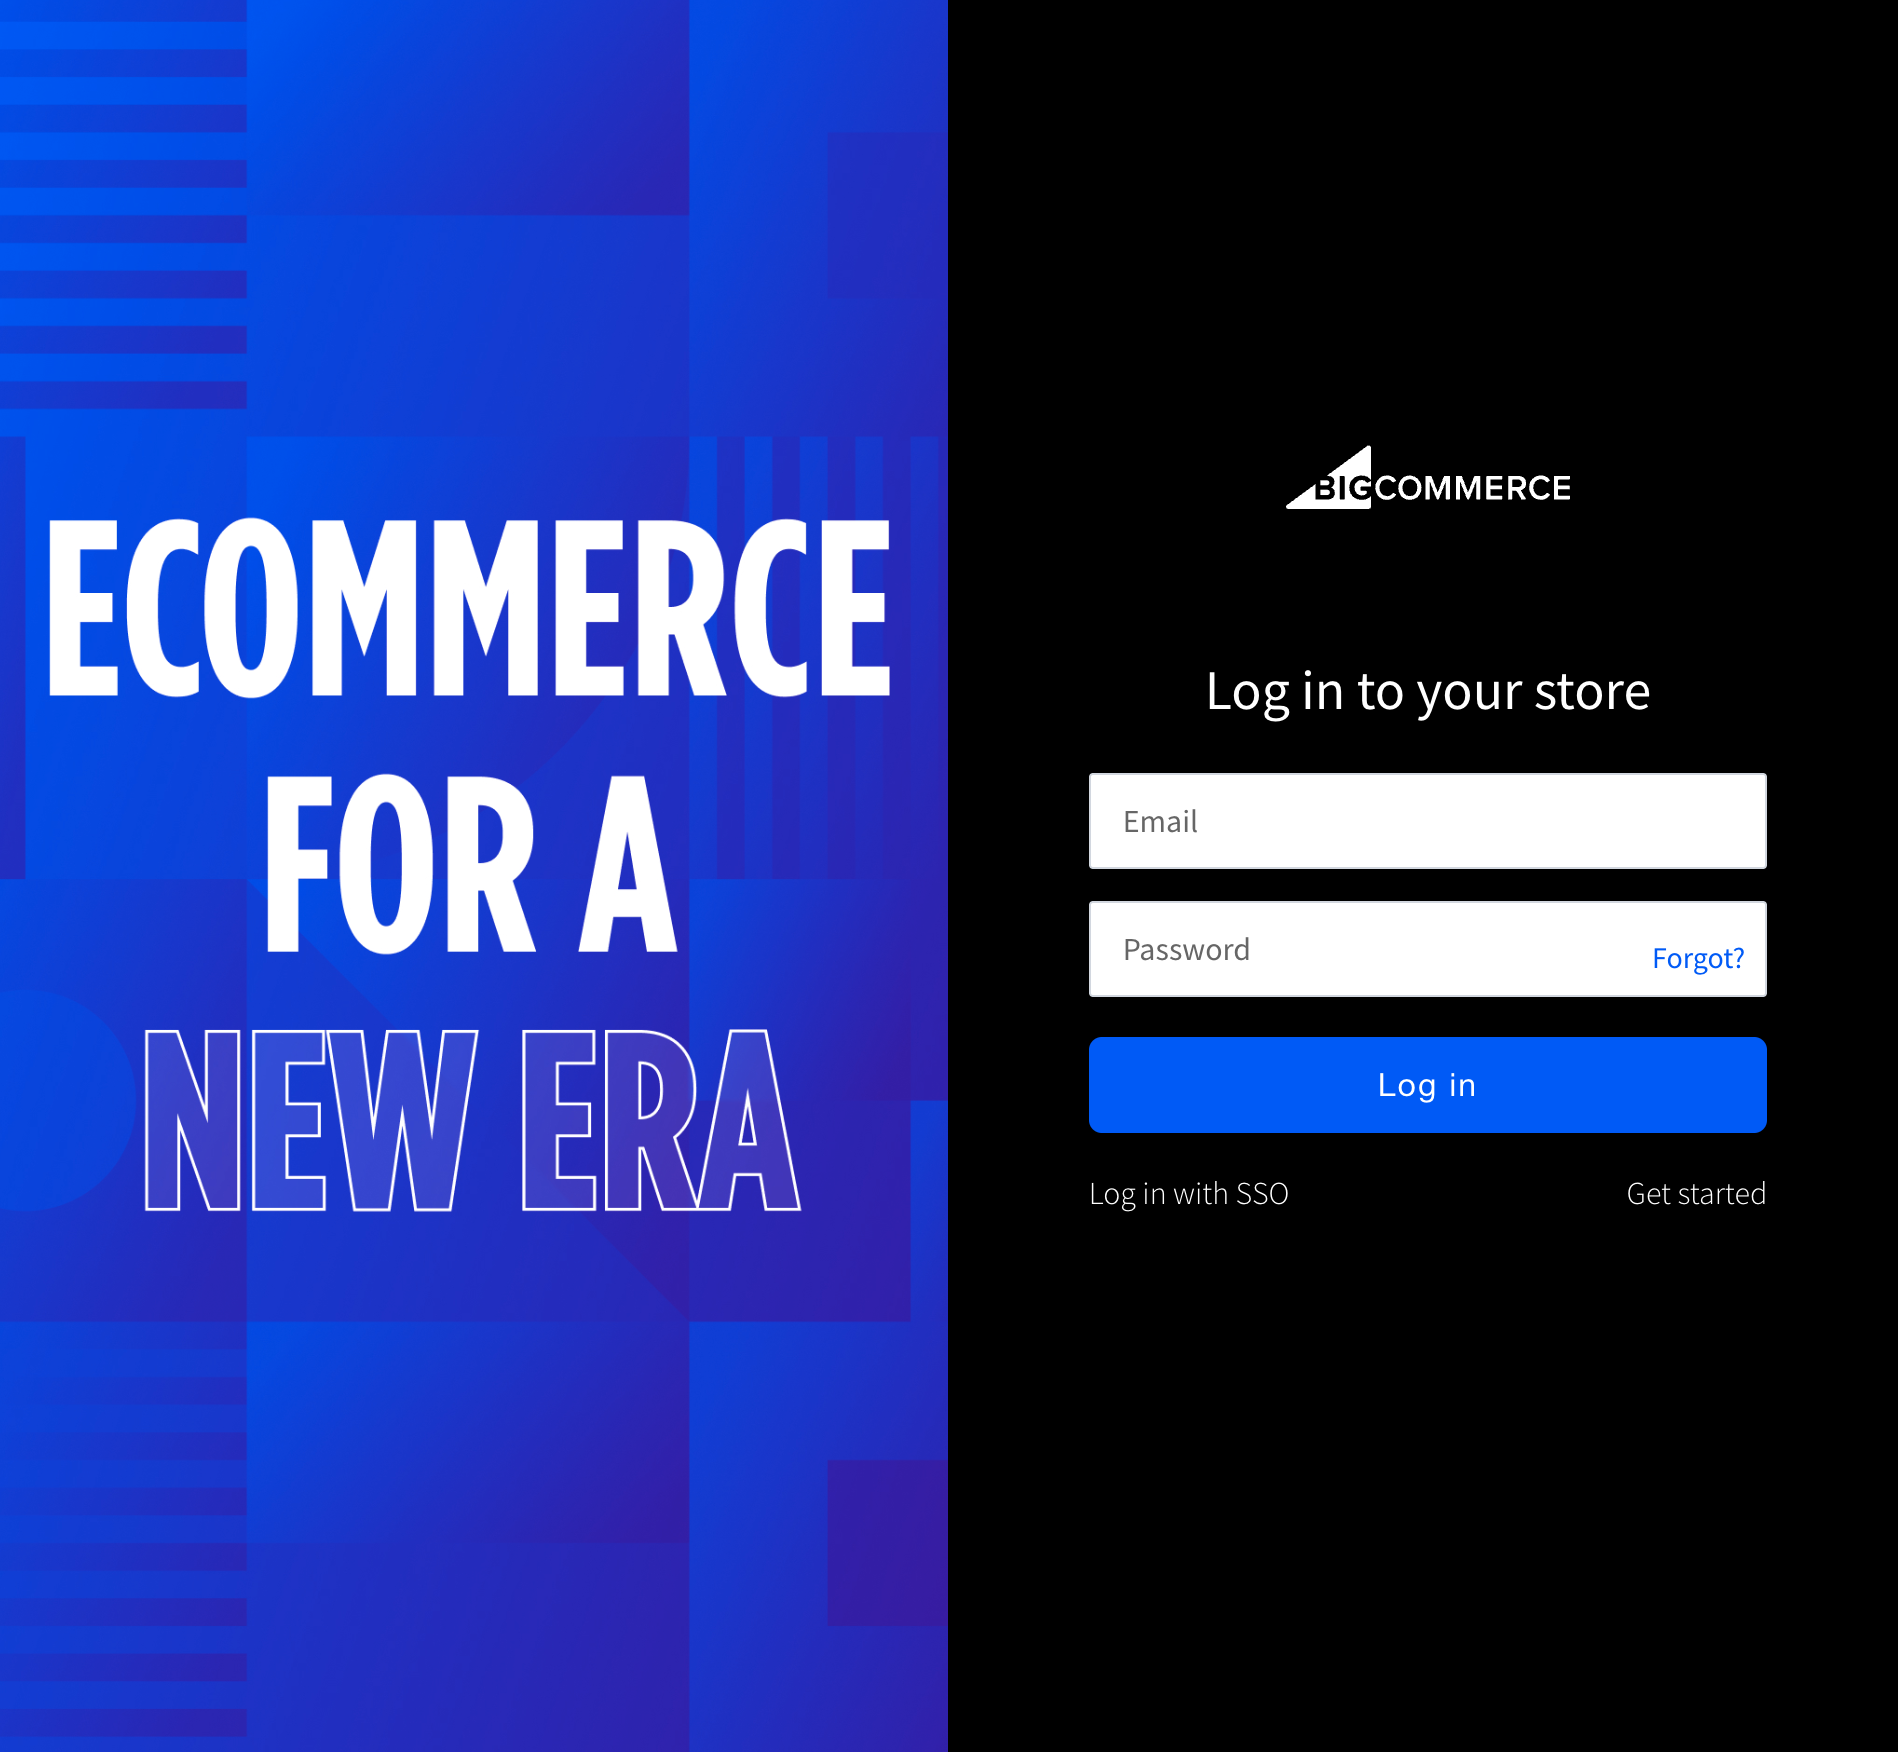 6._BigCommerce_Login_Page.png